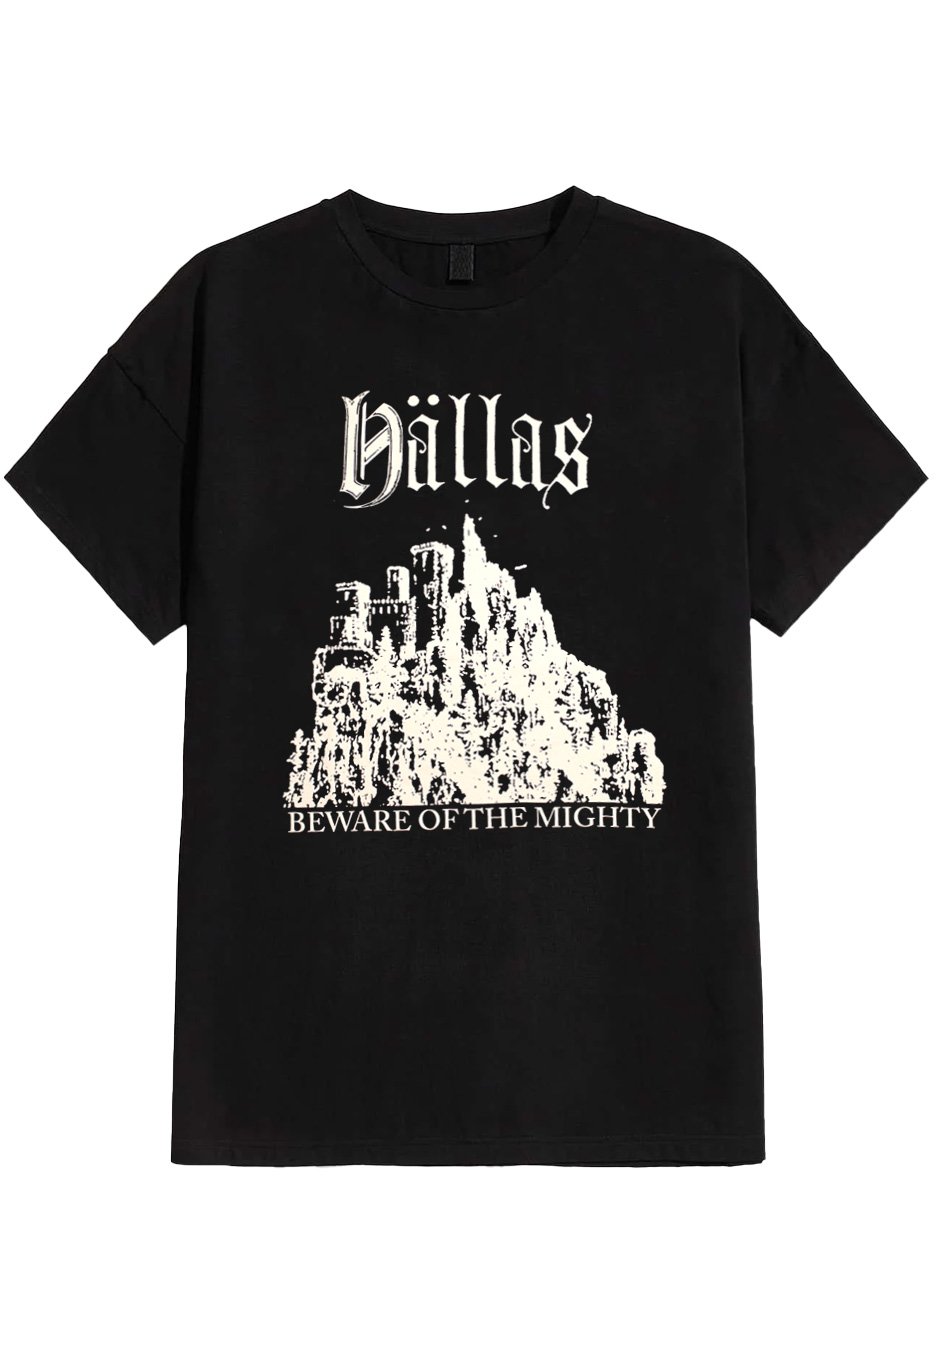 Hällas - Beware Of The Mighty - T-Shirt